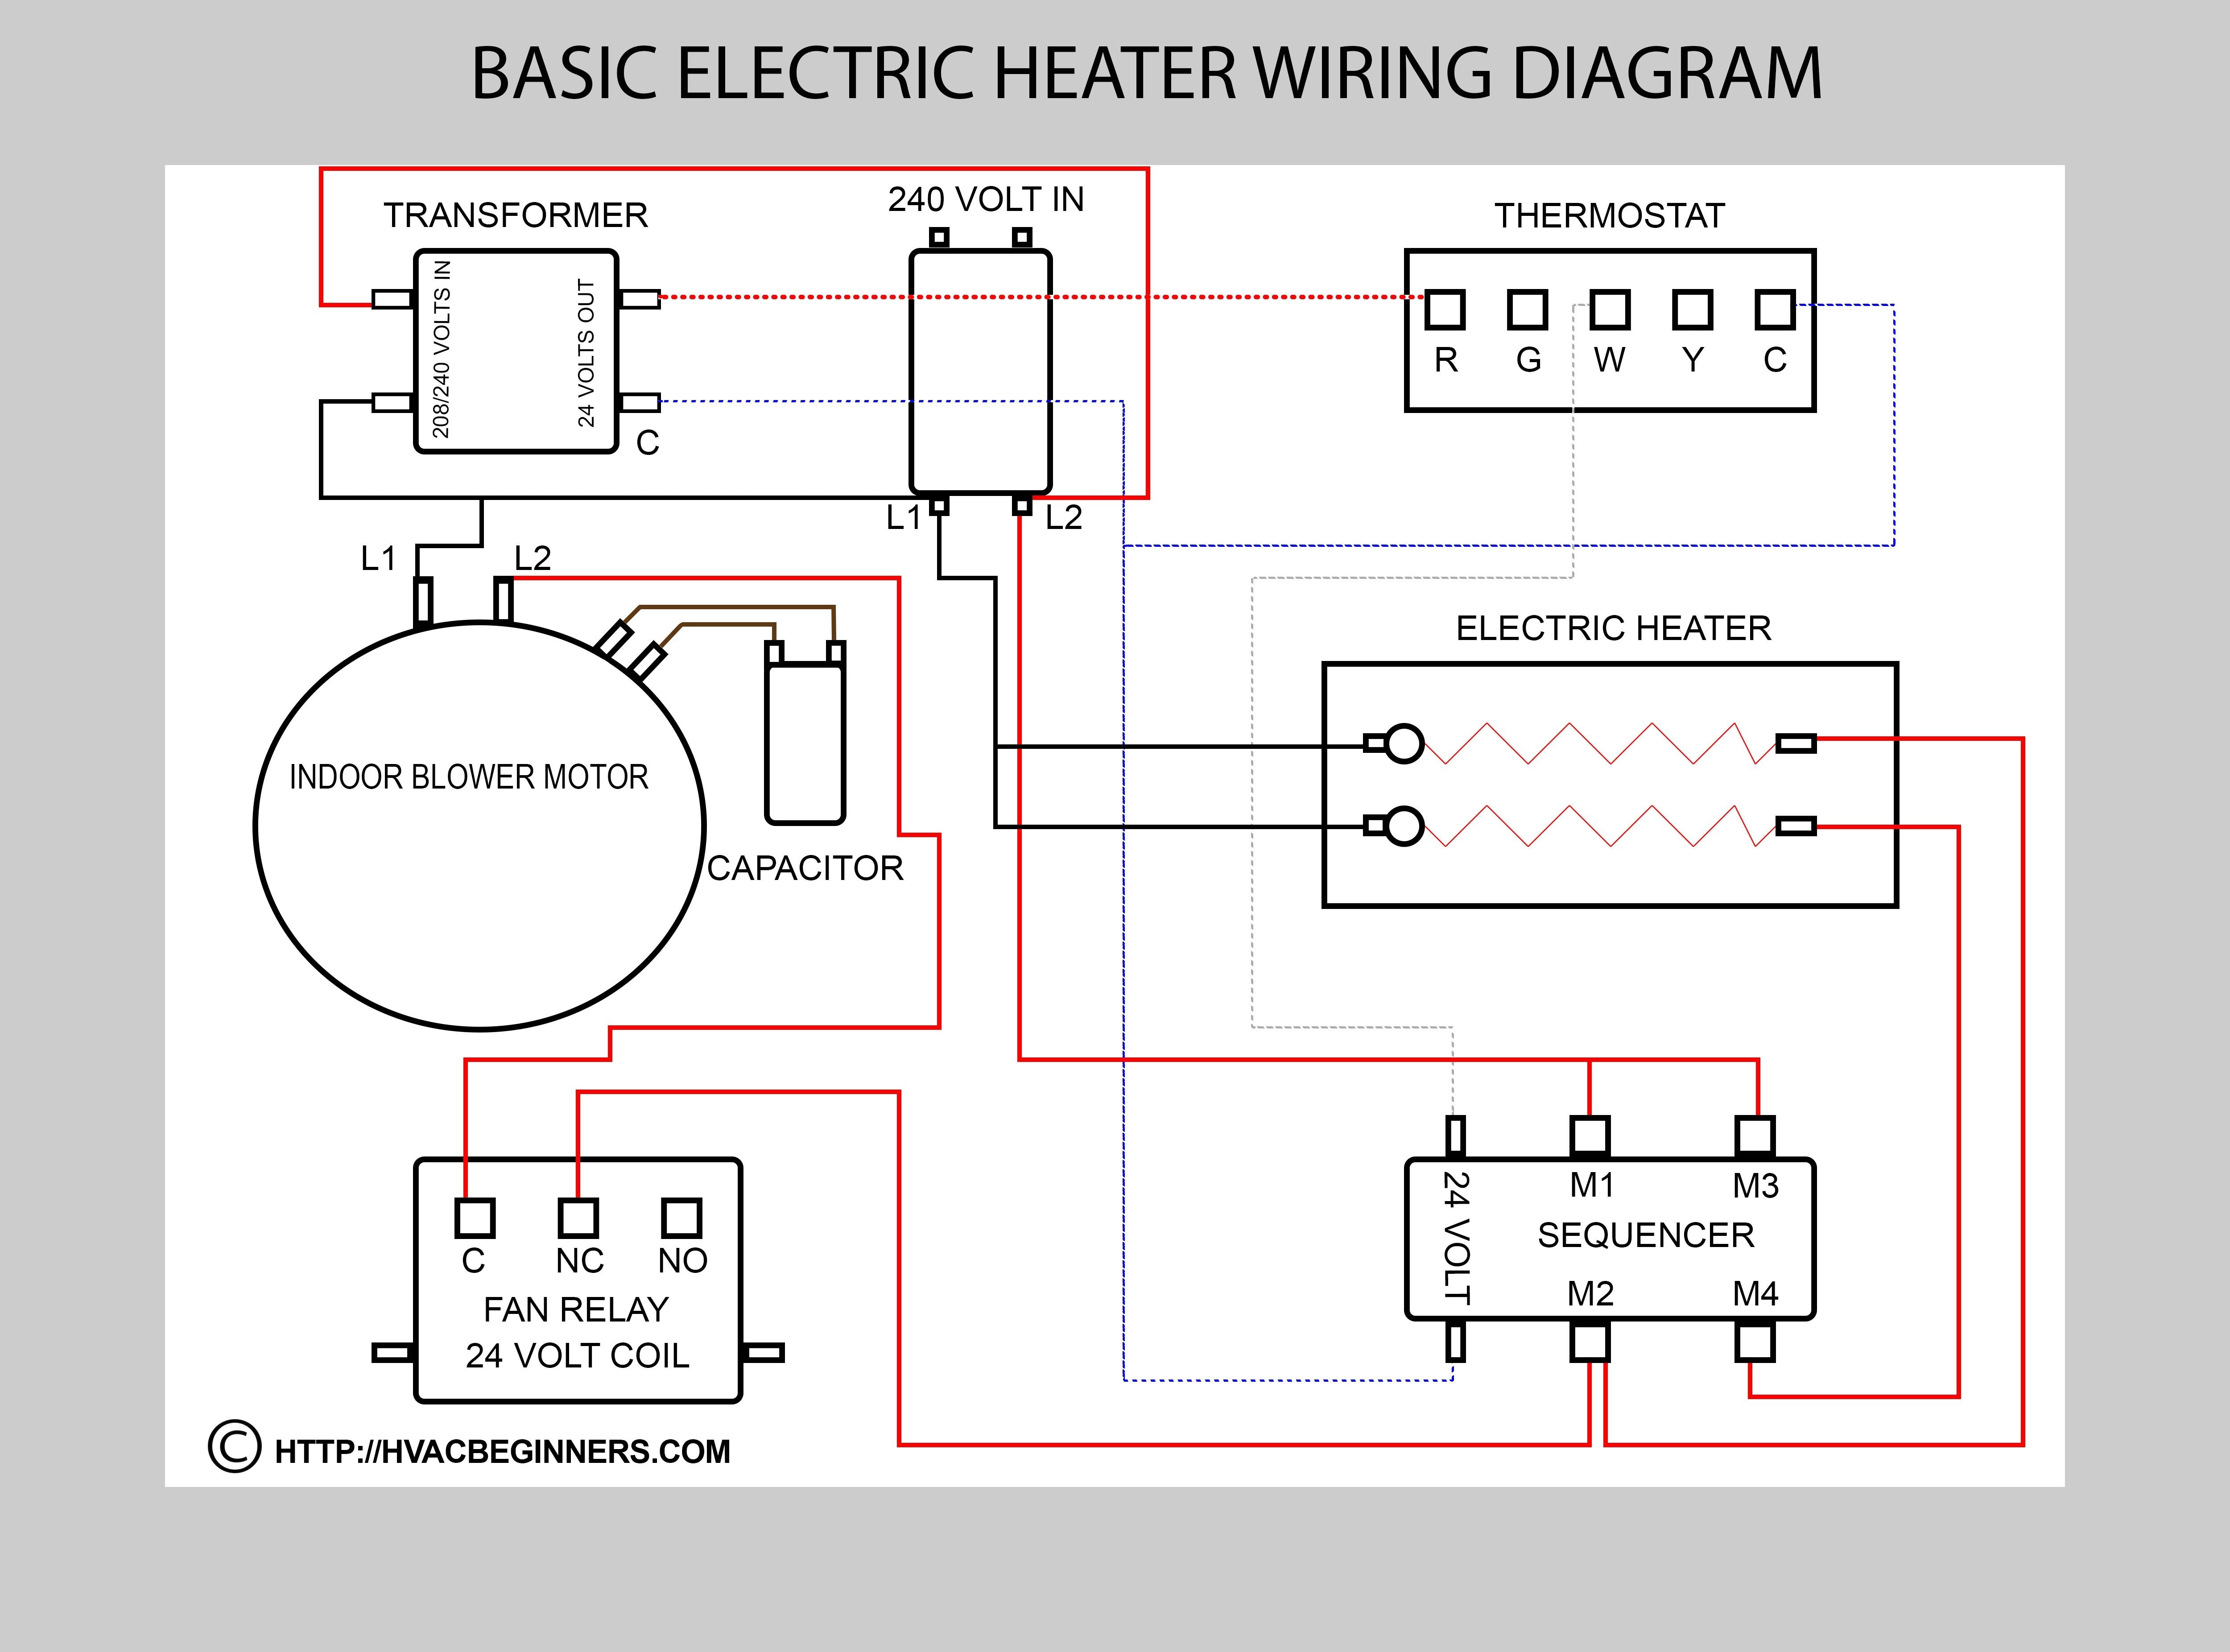 Wiring Diagram for Hvac Capacitor Fresh Central Air Conditioner Wiring Diagram Sample